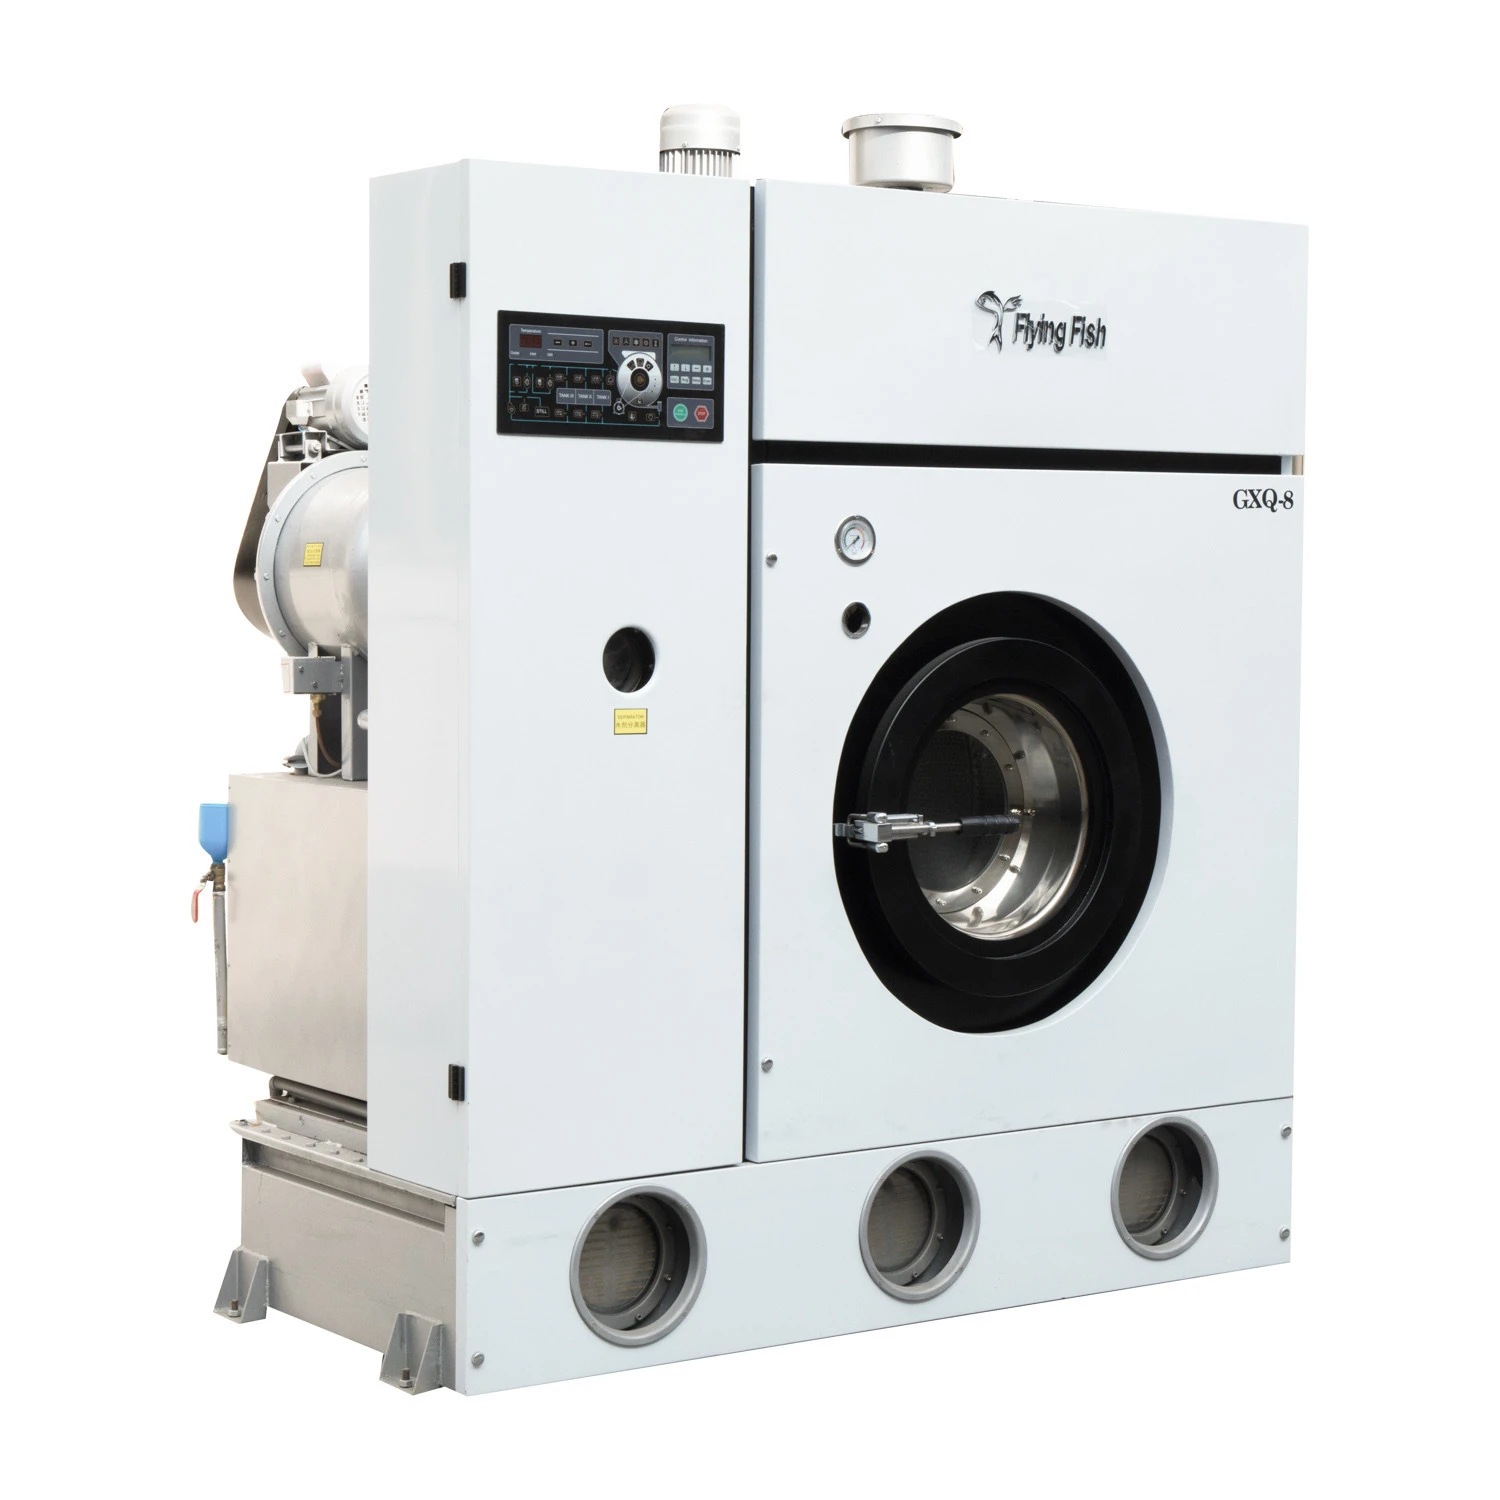 6kg to 30kg Automatic Dry Cleaning Equipment, Dry Cleaner Machine Good Quality Price